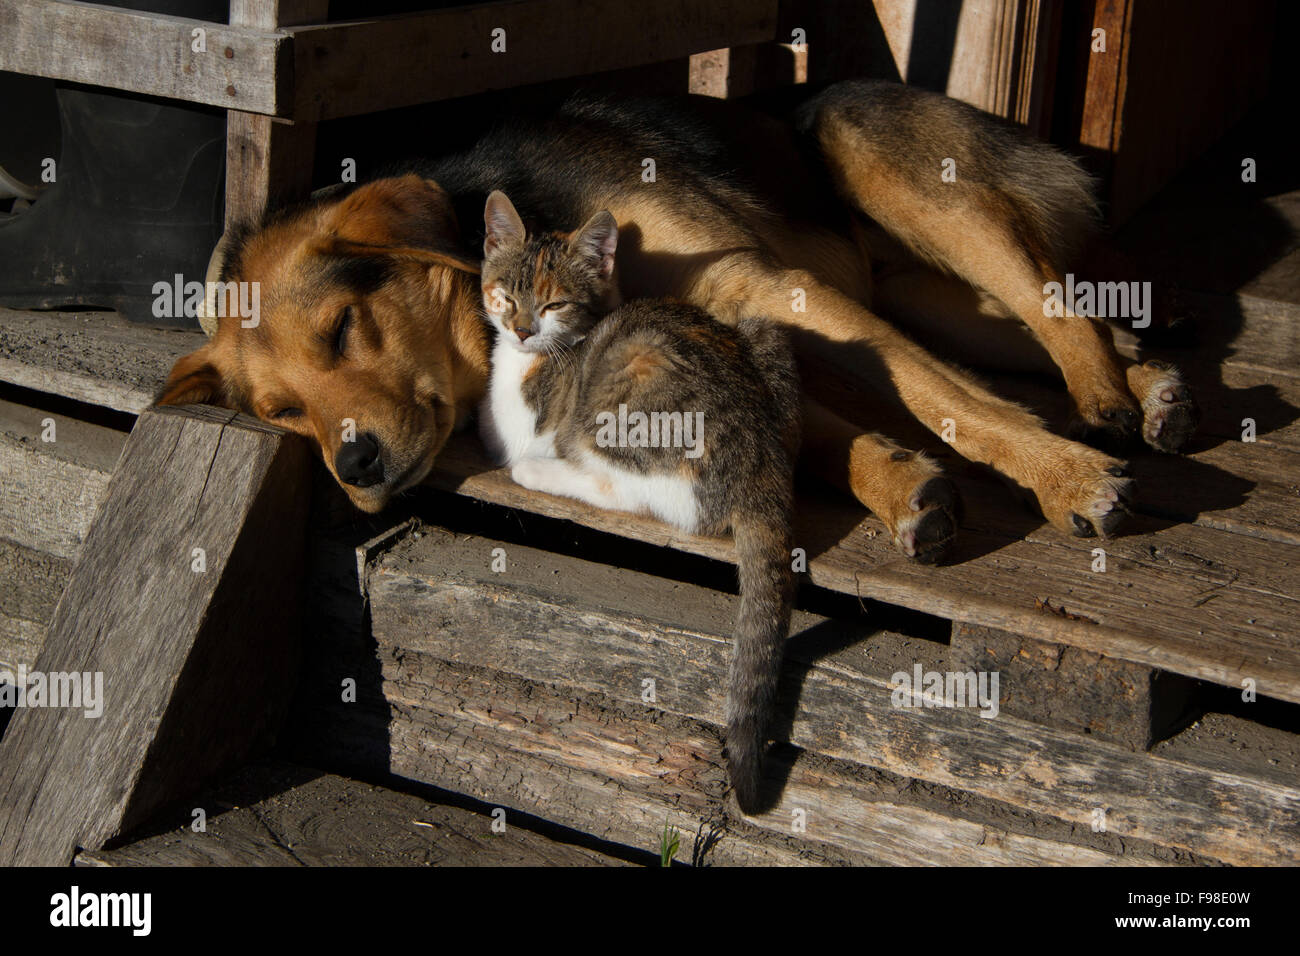 Enjoying the morning sun, a dog and cat cuddle up together on the porch of a rustic cabin. Stock Photo